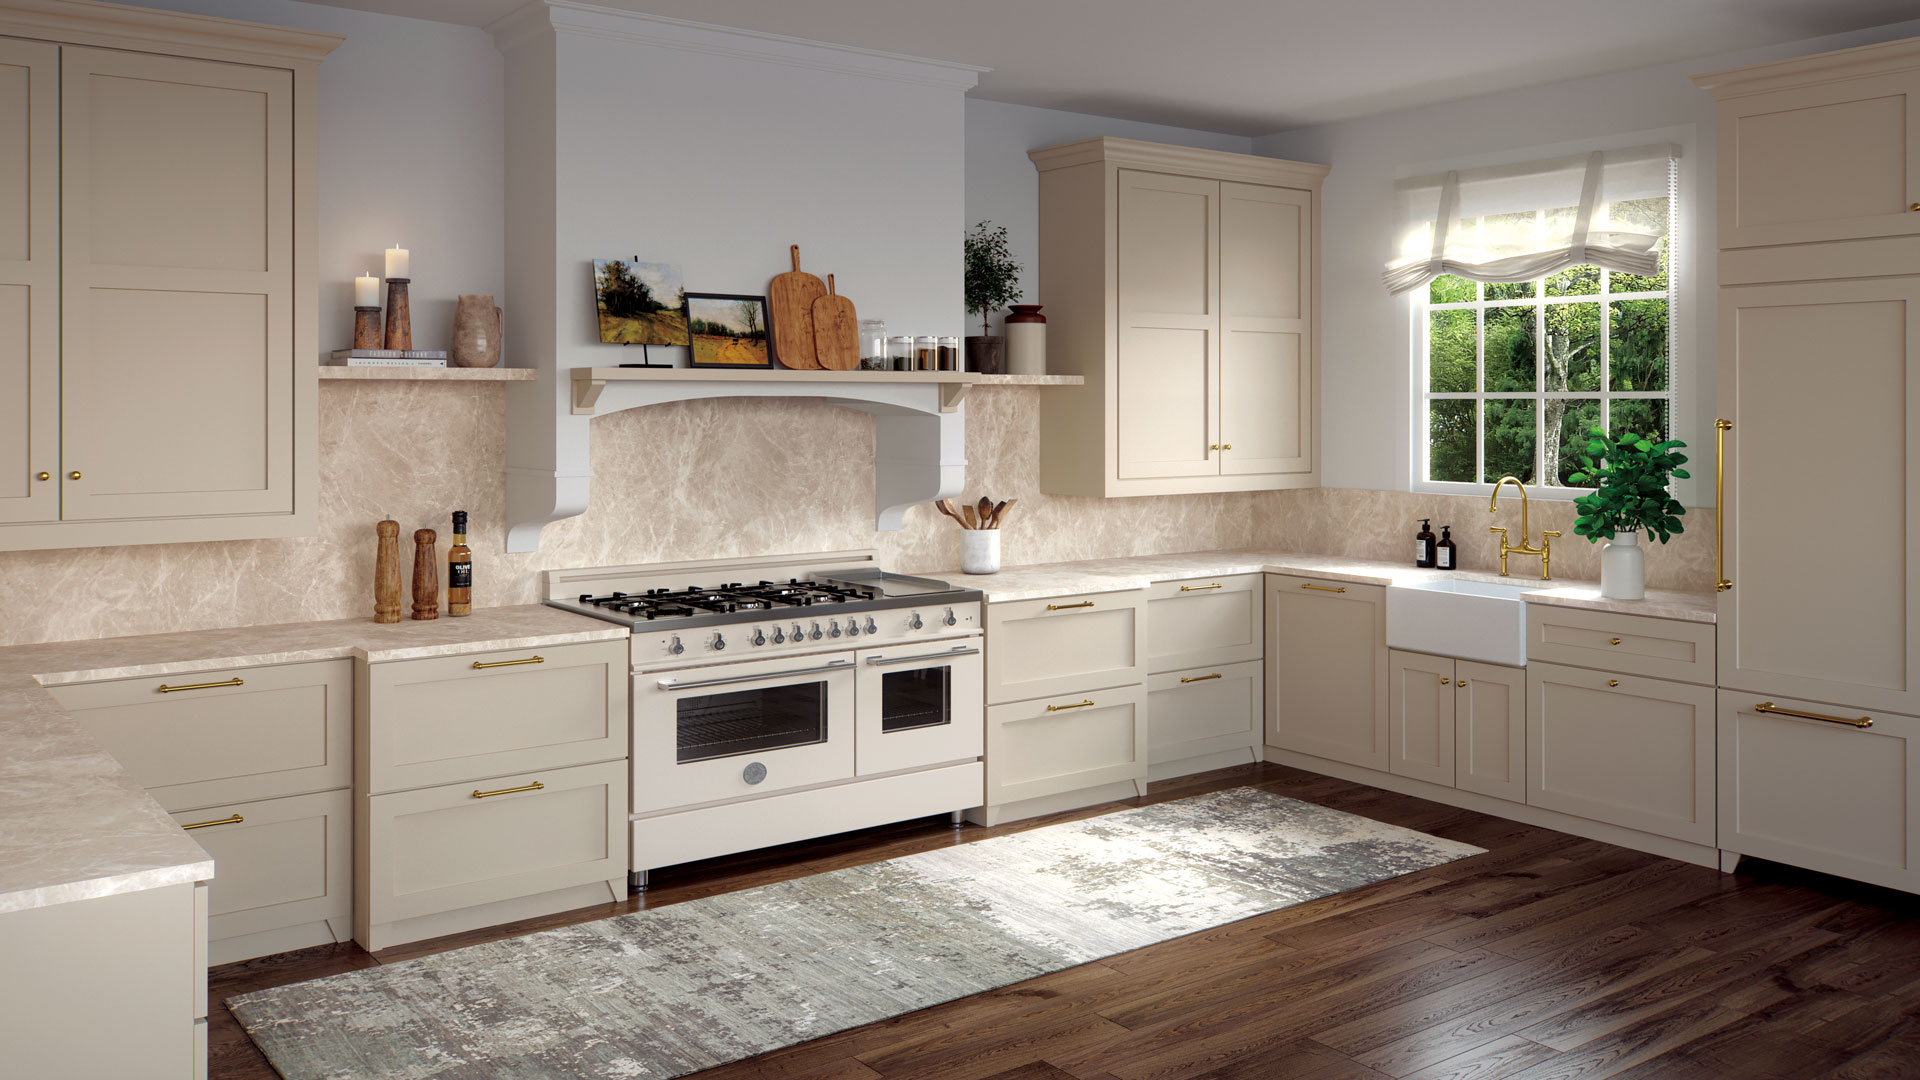 Taking a look at traditional kitchen design